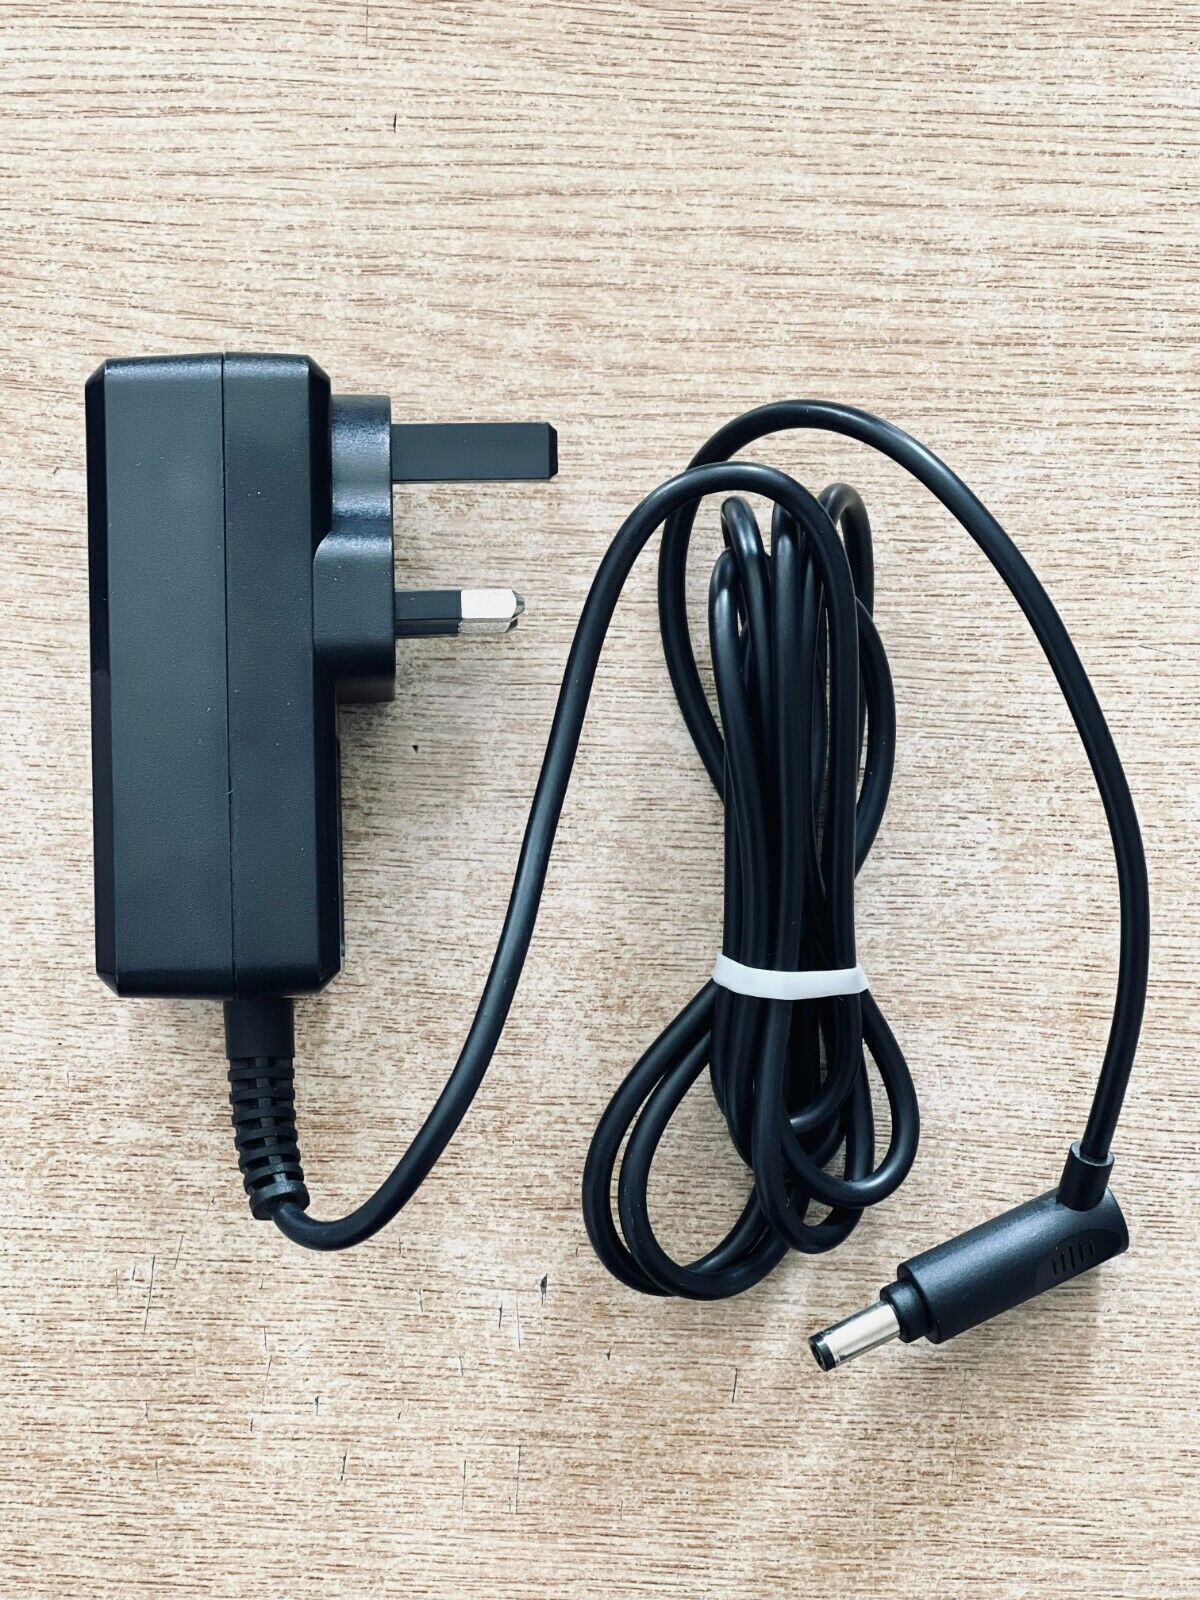 *Brand NEW*ADAPTER CHARGER PLUG FOR LED LAMP NAIL DRYER NAILS UK 12V 2A AC/DC POWER SUPPLY